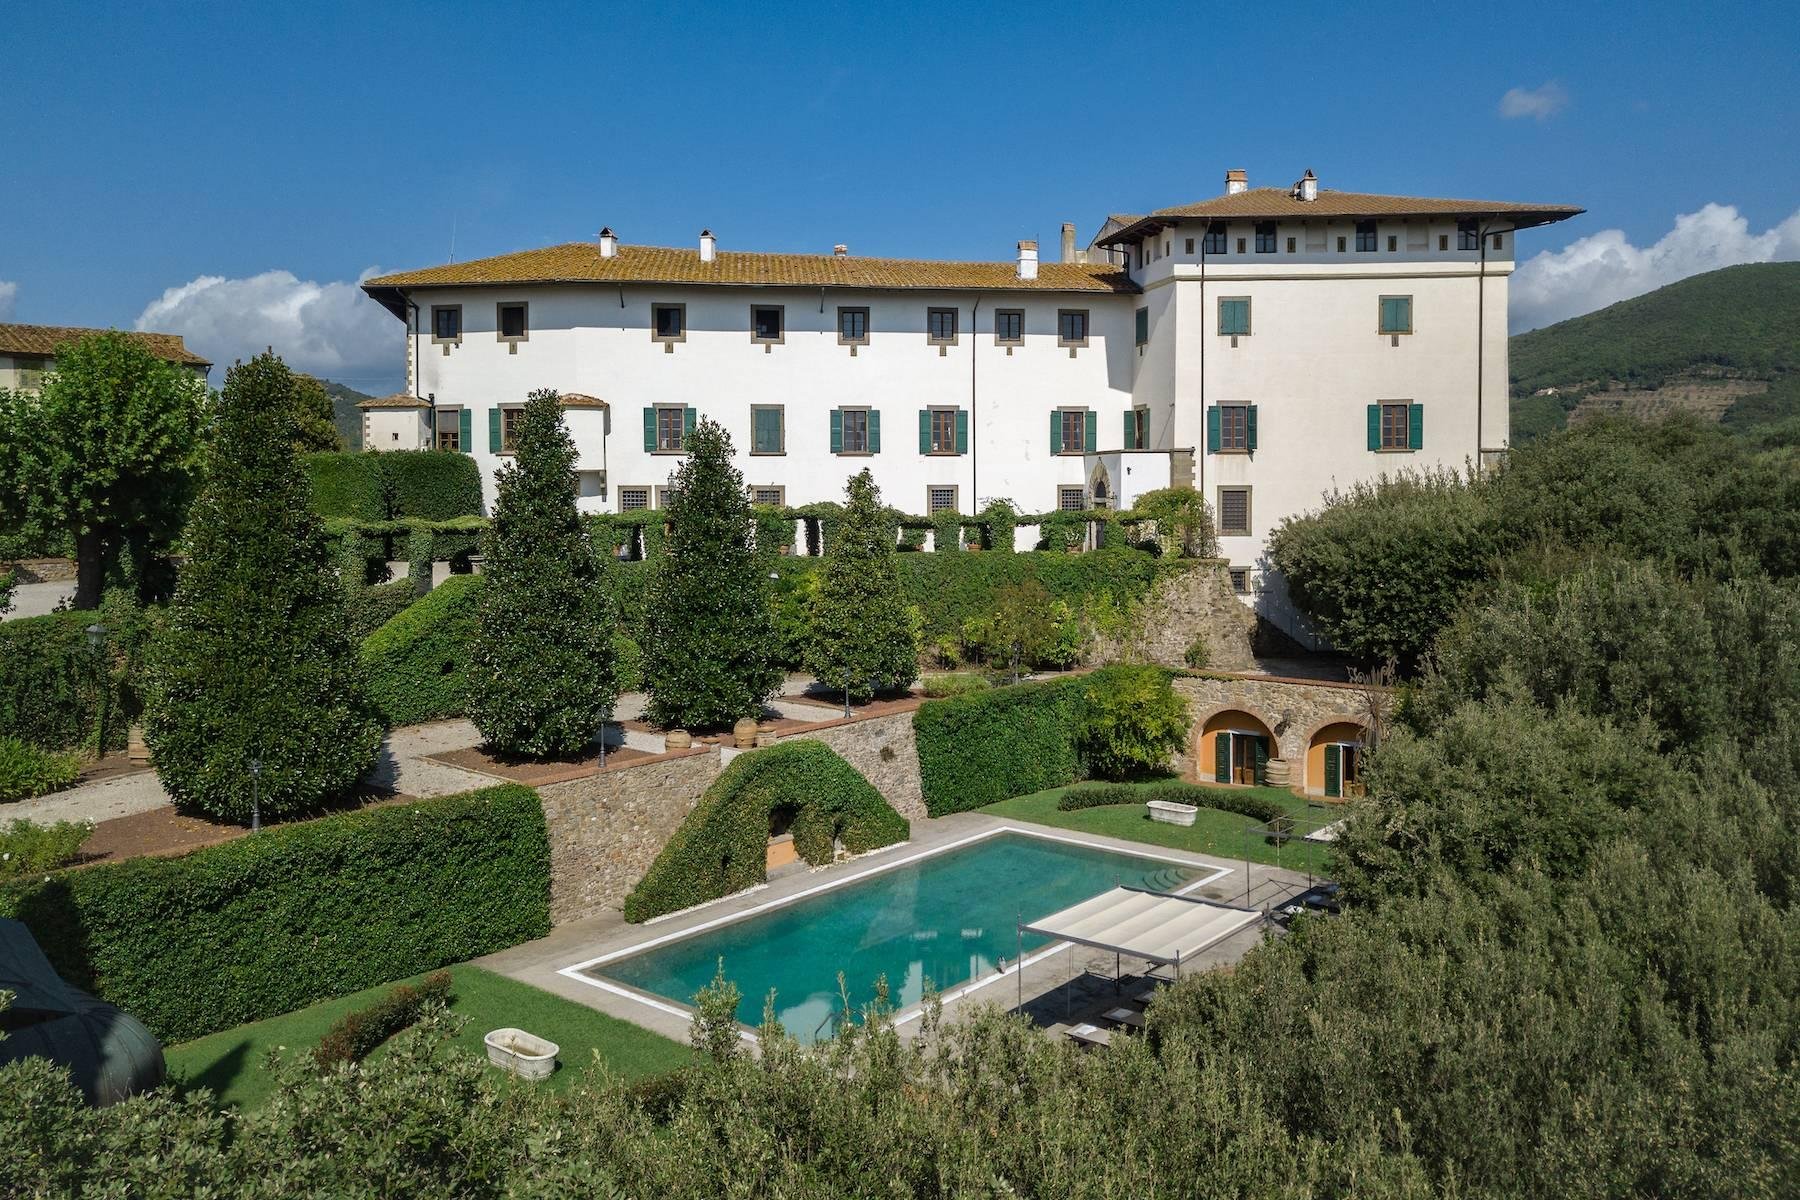 Francis York  Tuscan Villa Owned by Italian Aristocracy Available to Book as a Luxury Villa Rental 15.jpg